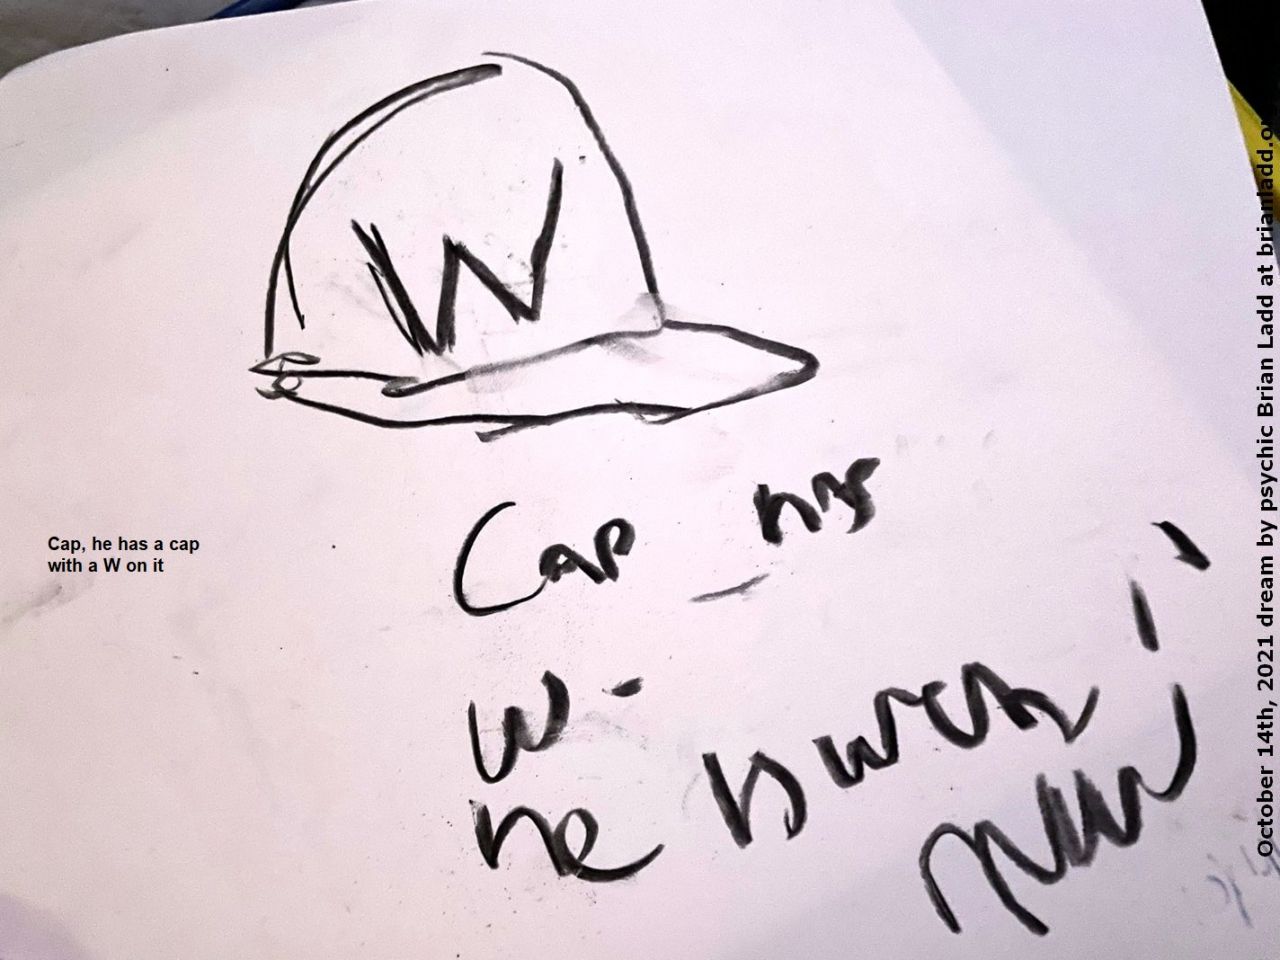 14 Oct 2021 3  Cap, he has a cap with a W on it...
Cap, he has a cap with a W on it.
